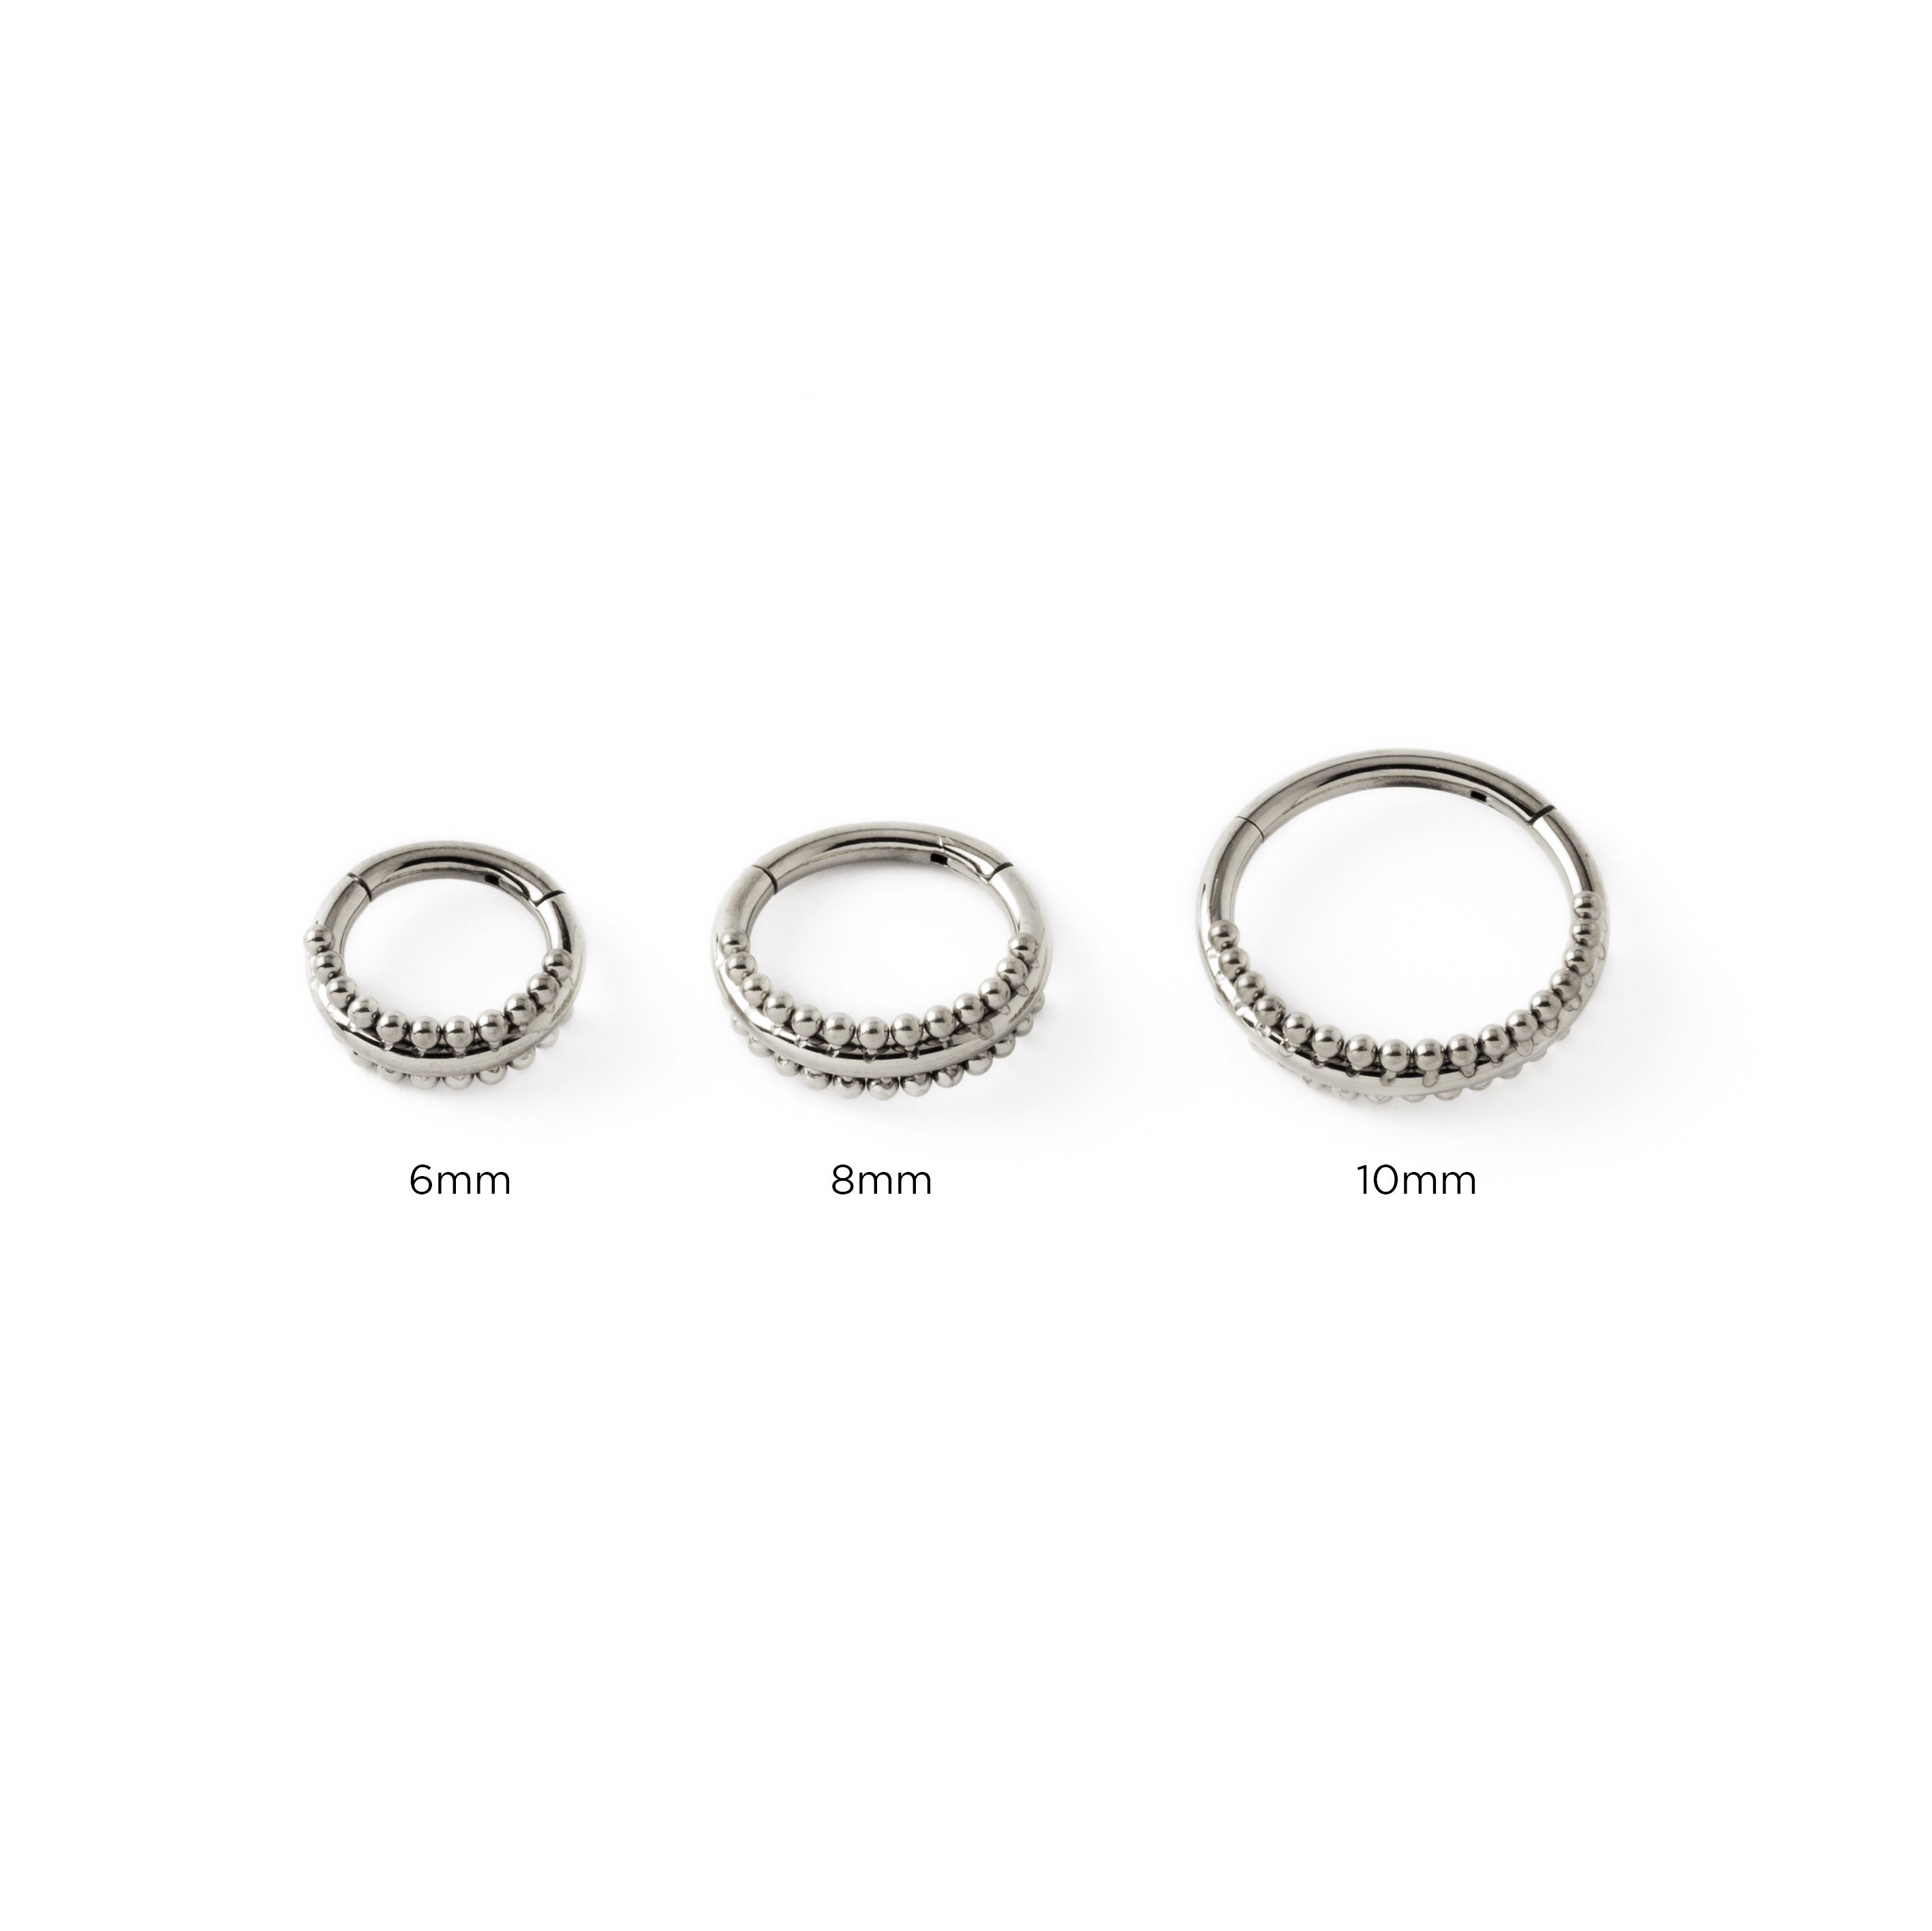 6mm, 8mm, 10mm dimeter Didi surgical steel clicker ring frontal view